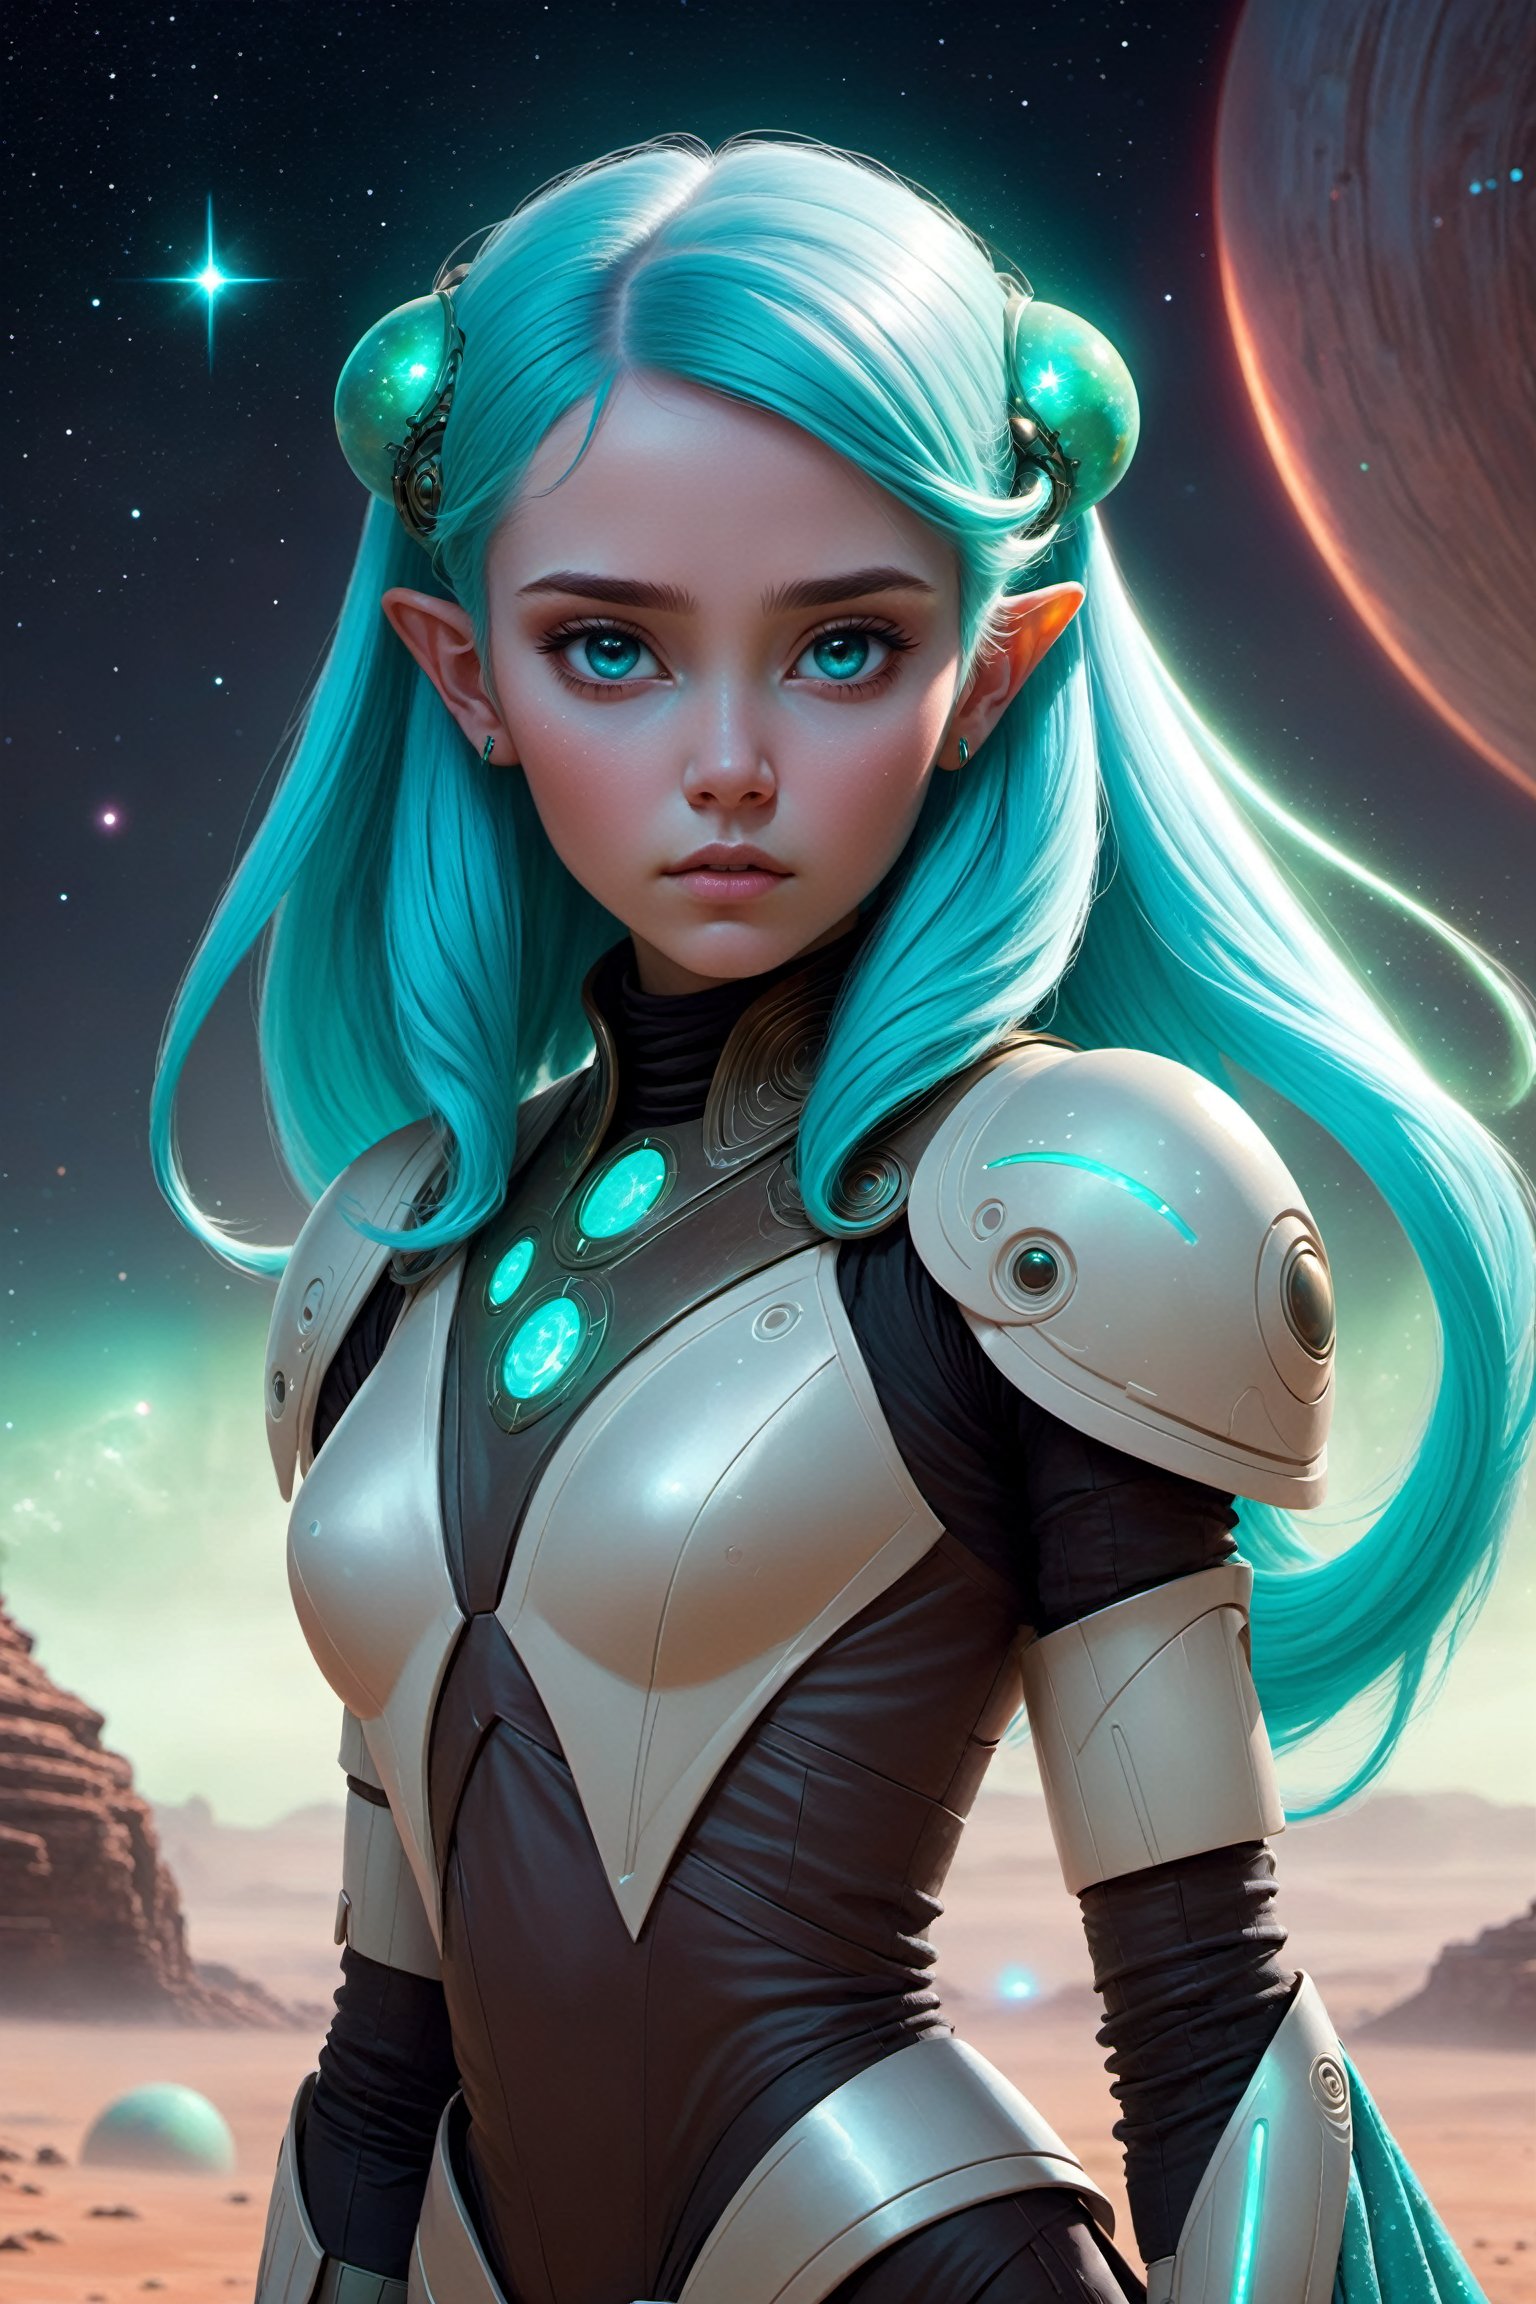 1girl, ethereal fantasy, concept art, cyan hair, glowing hair, alien planet, Star Wars, magnificent, futuristic cloths, beautiful face, celestial, ethereal, epic, majestic, magical, fantasy, eather trim